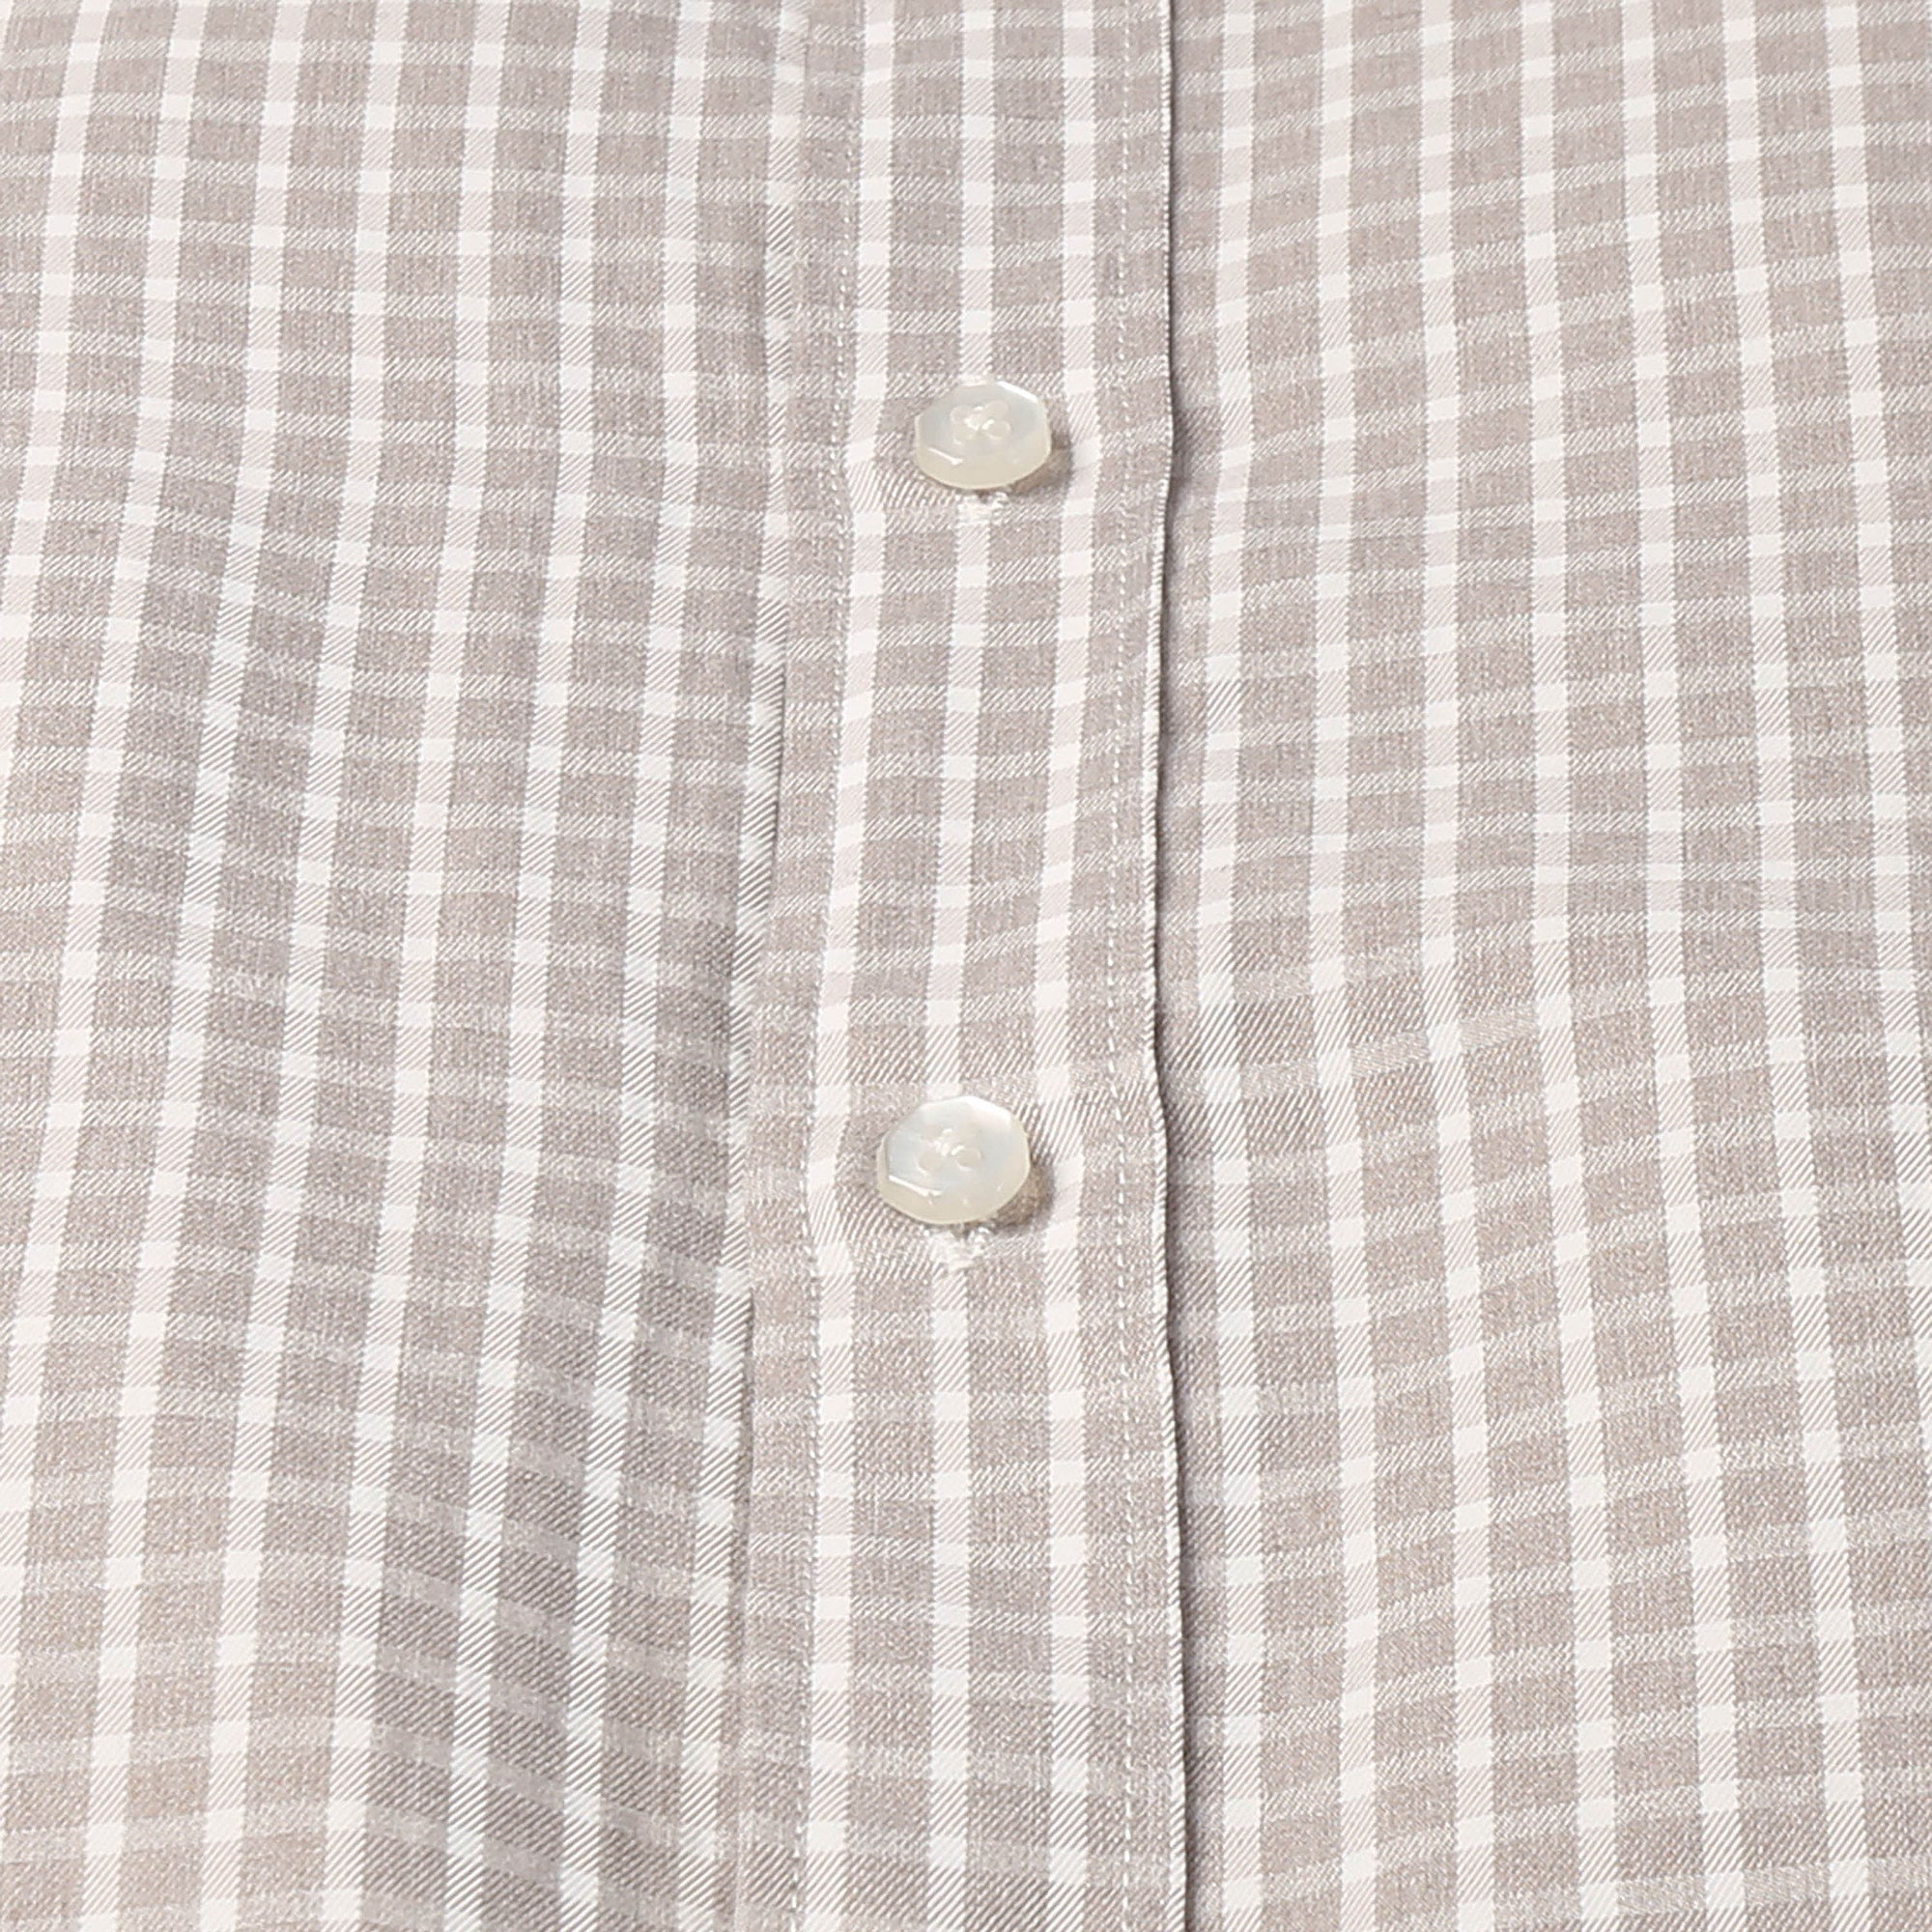 classic shirts_formal shirts_formal shirts for men_formal clothes for men_button down shirt_button down_mens long sleeve button down_Tan Checker